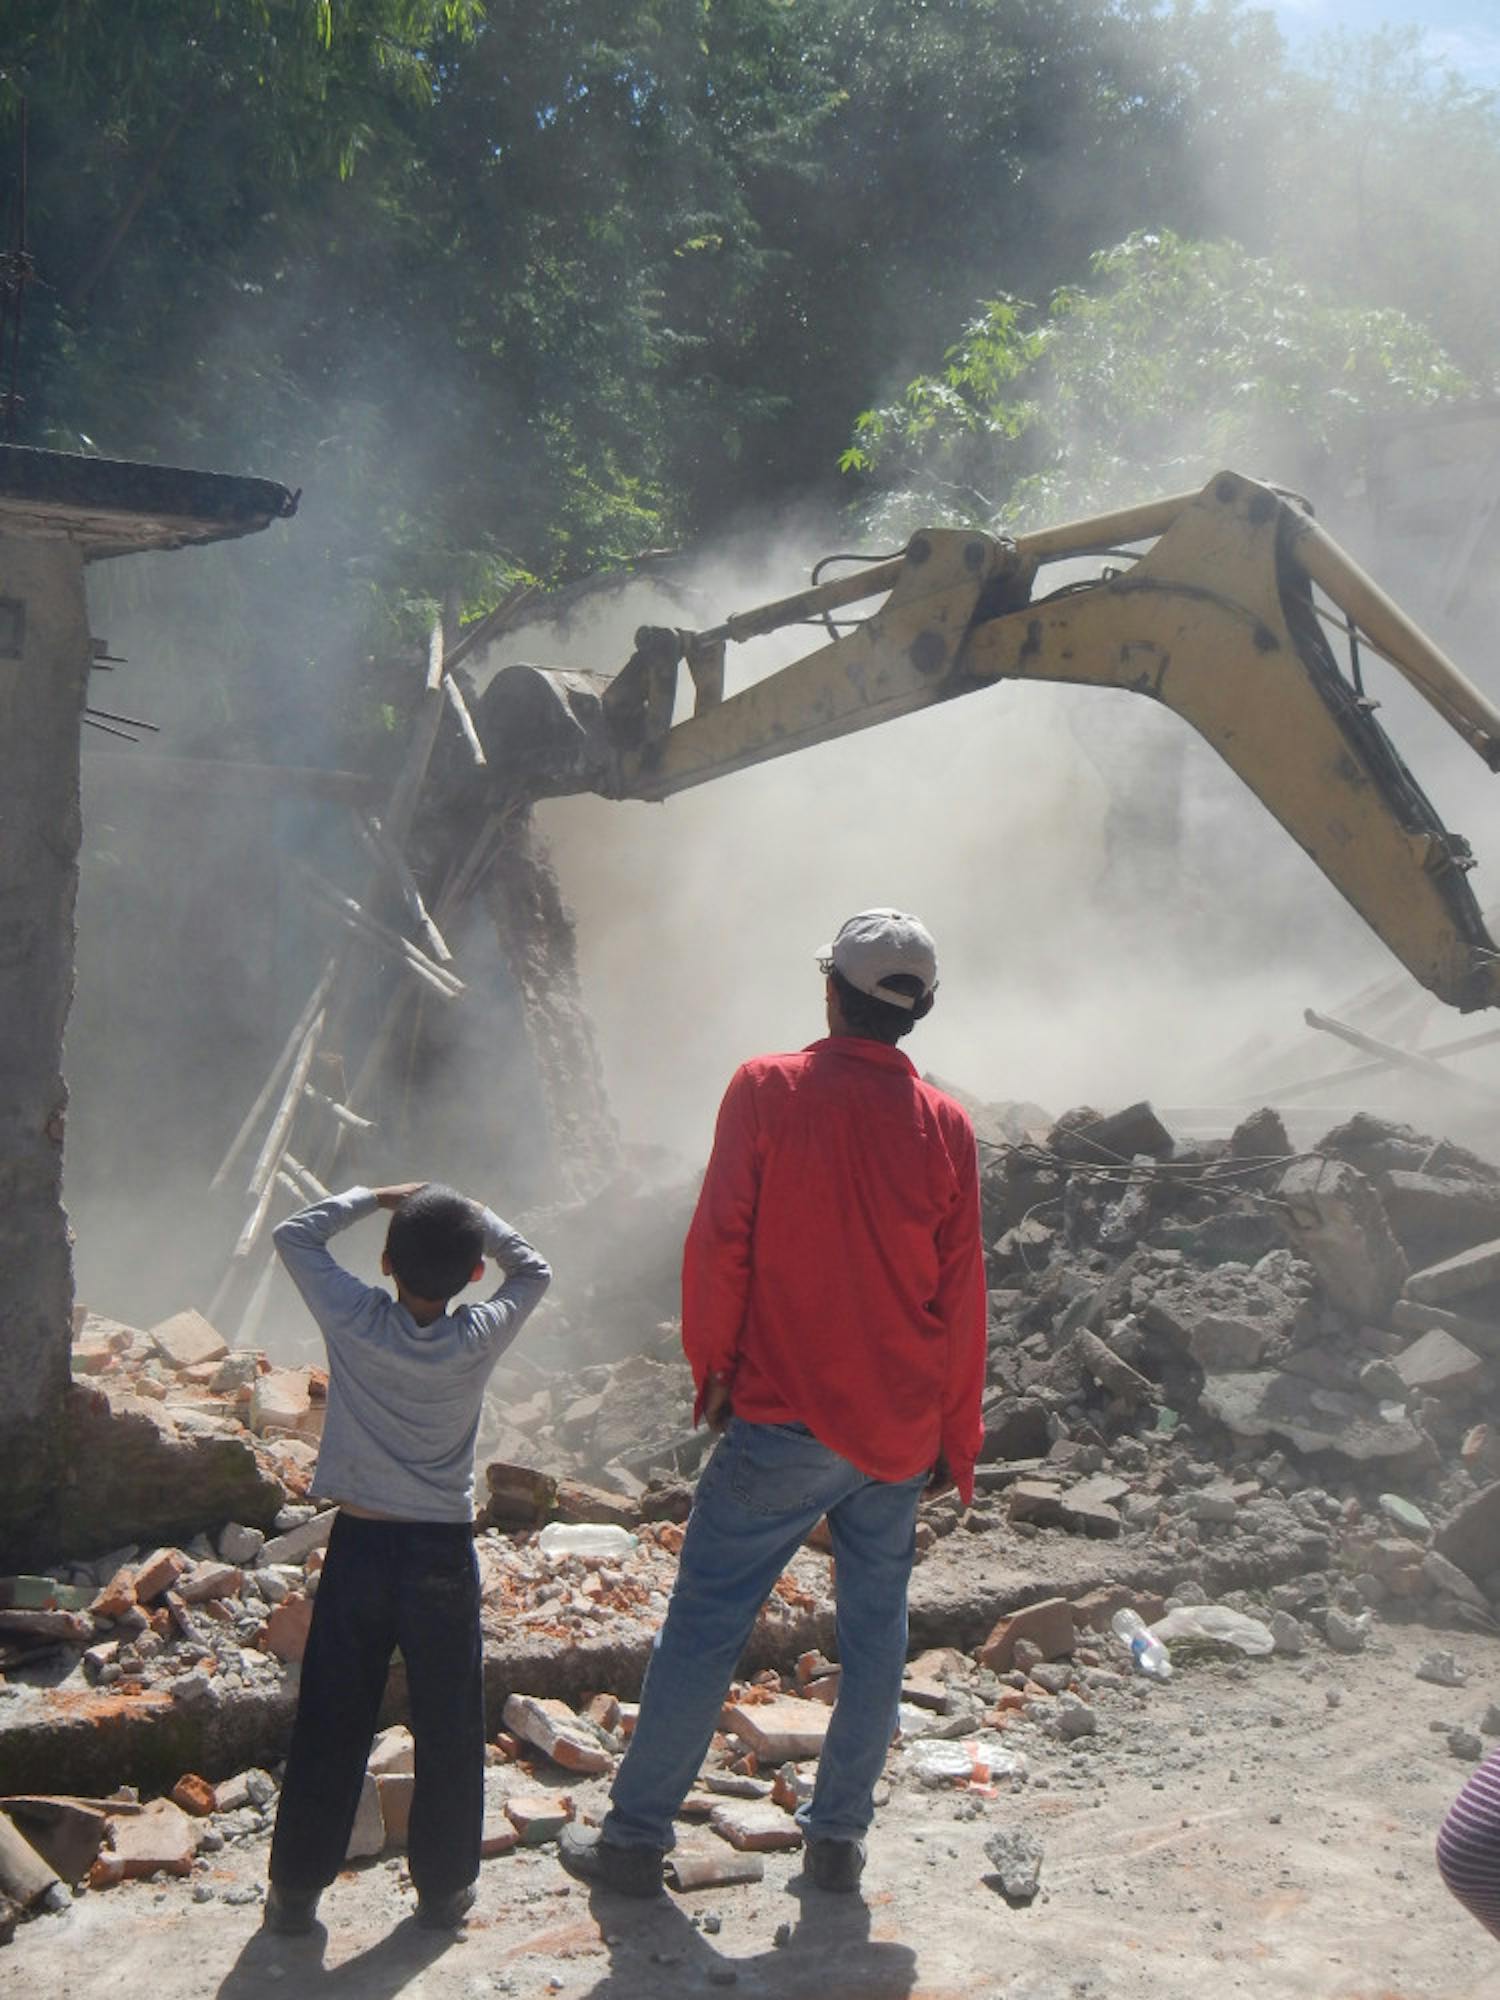 A father and son watch their damaged home being demolished in the village of Contla, Mexico.